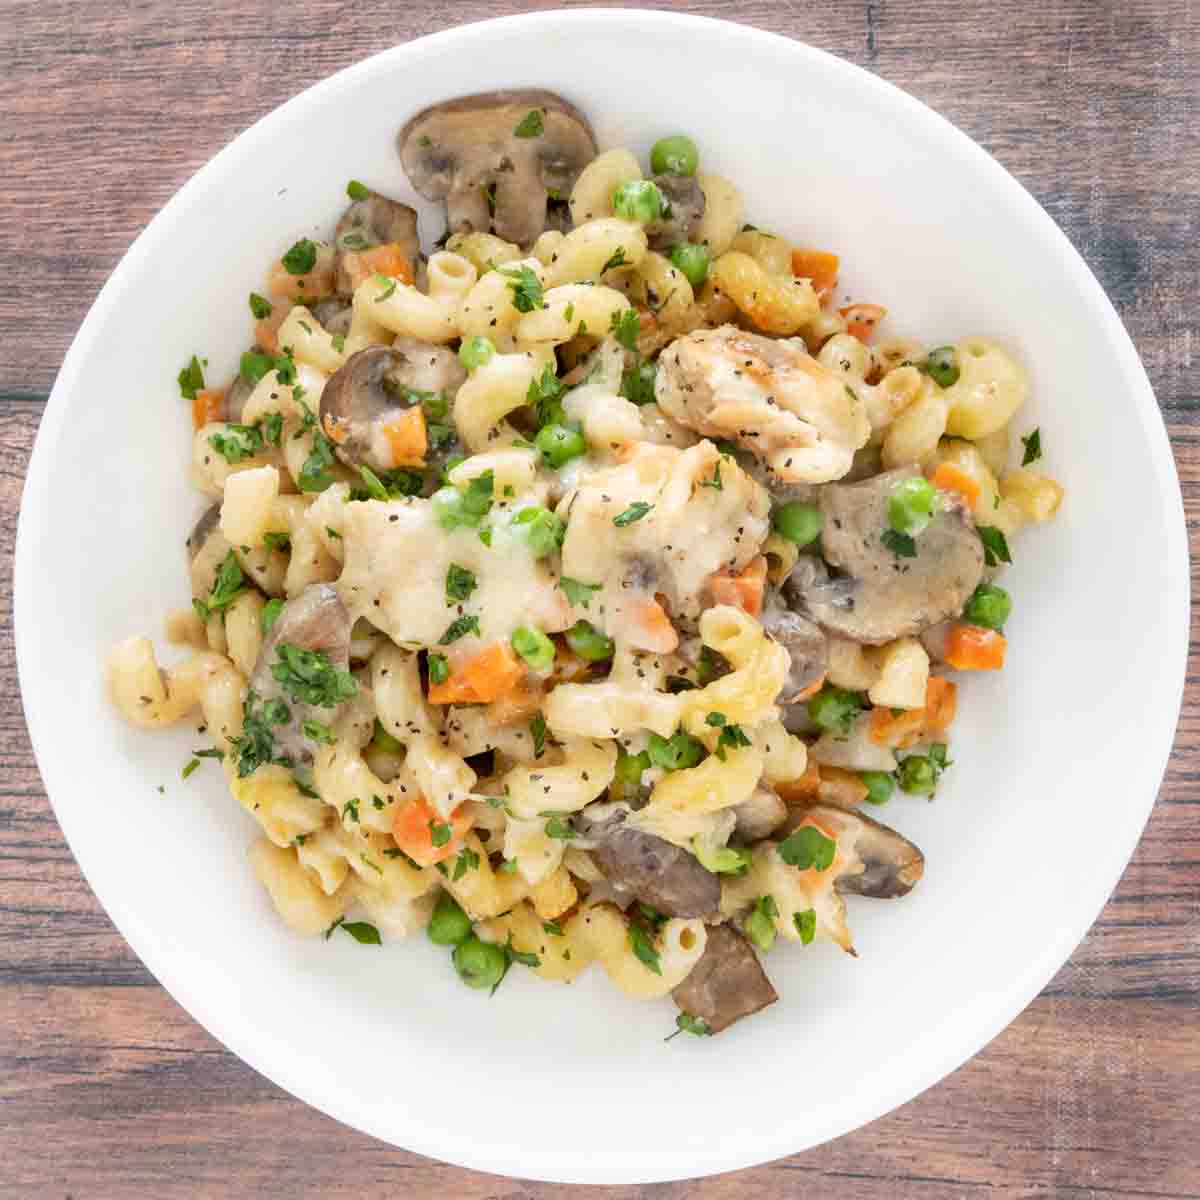 Chicken and mushroom pasta bake in a white bowl.